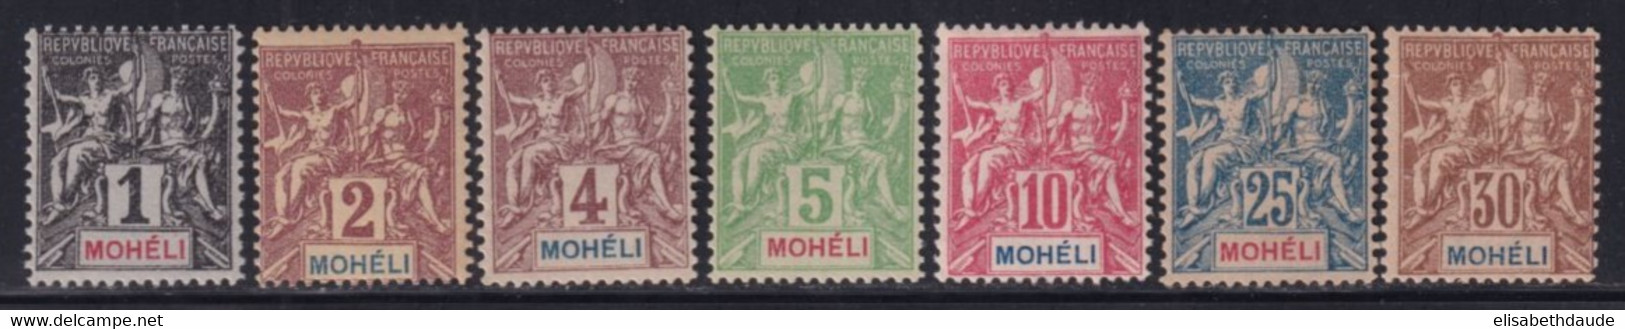 MOHELI - TYPE GROUPE  YVERT N°1/5 +7/8 * MLH (5 ET 7 SANS GOMME - 8 INFIME COUPURE) - COTE 2022 = 62 EUROS - Unused Stamps